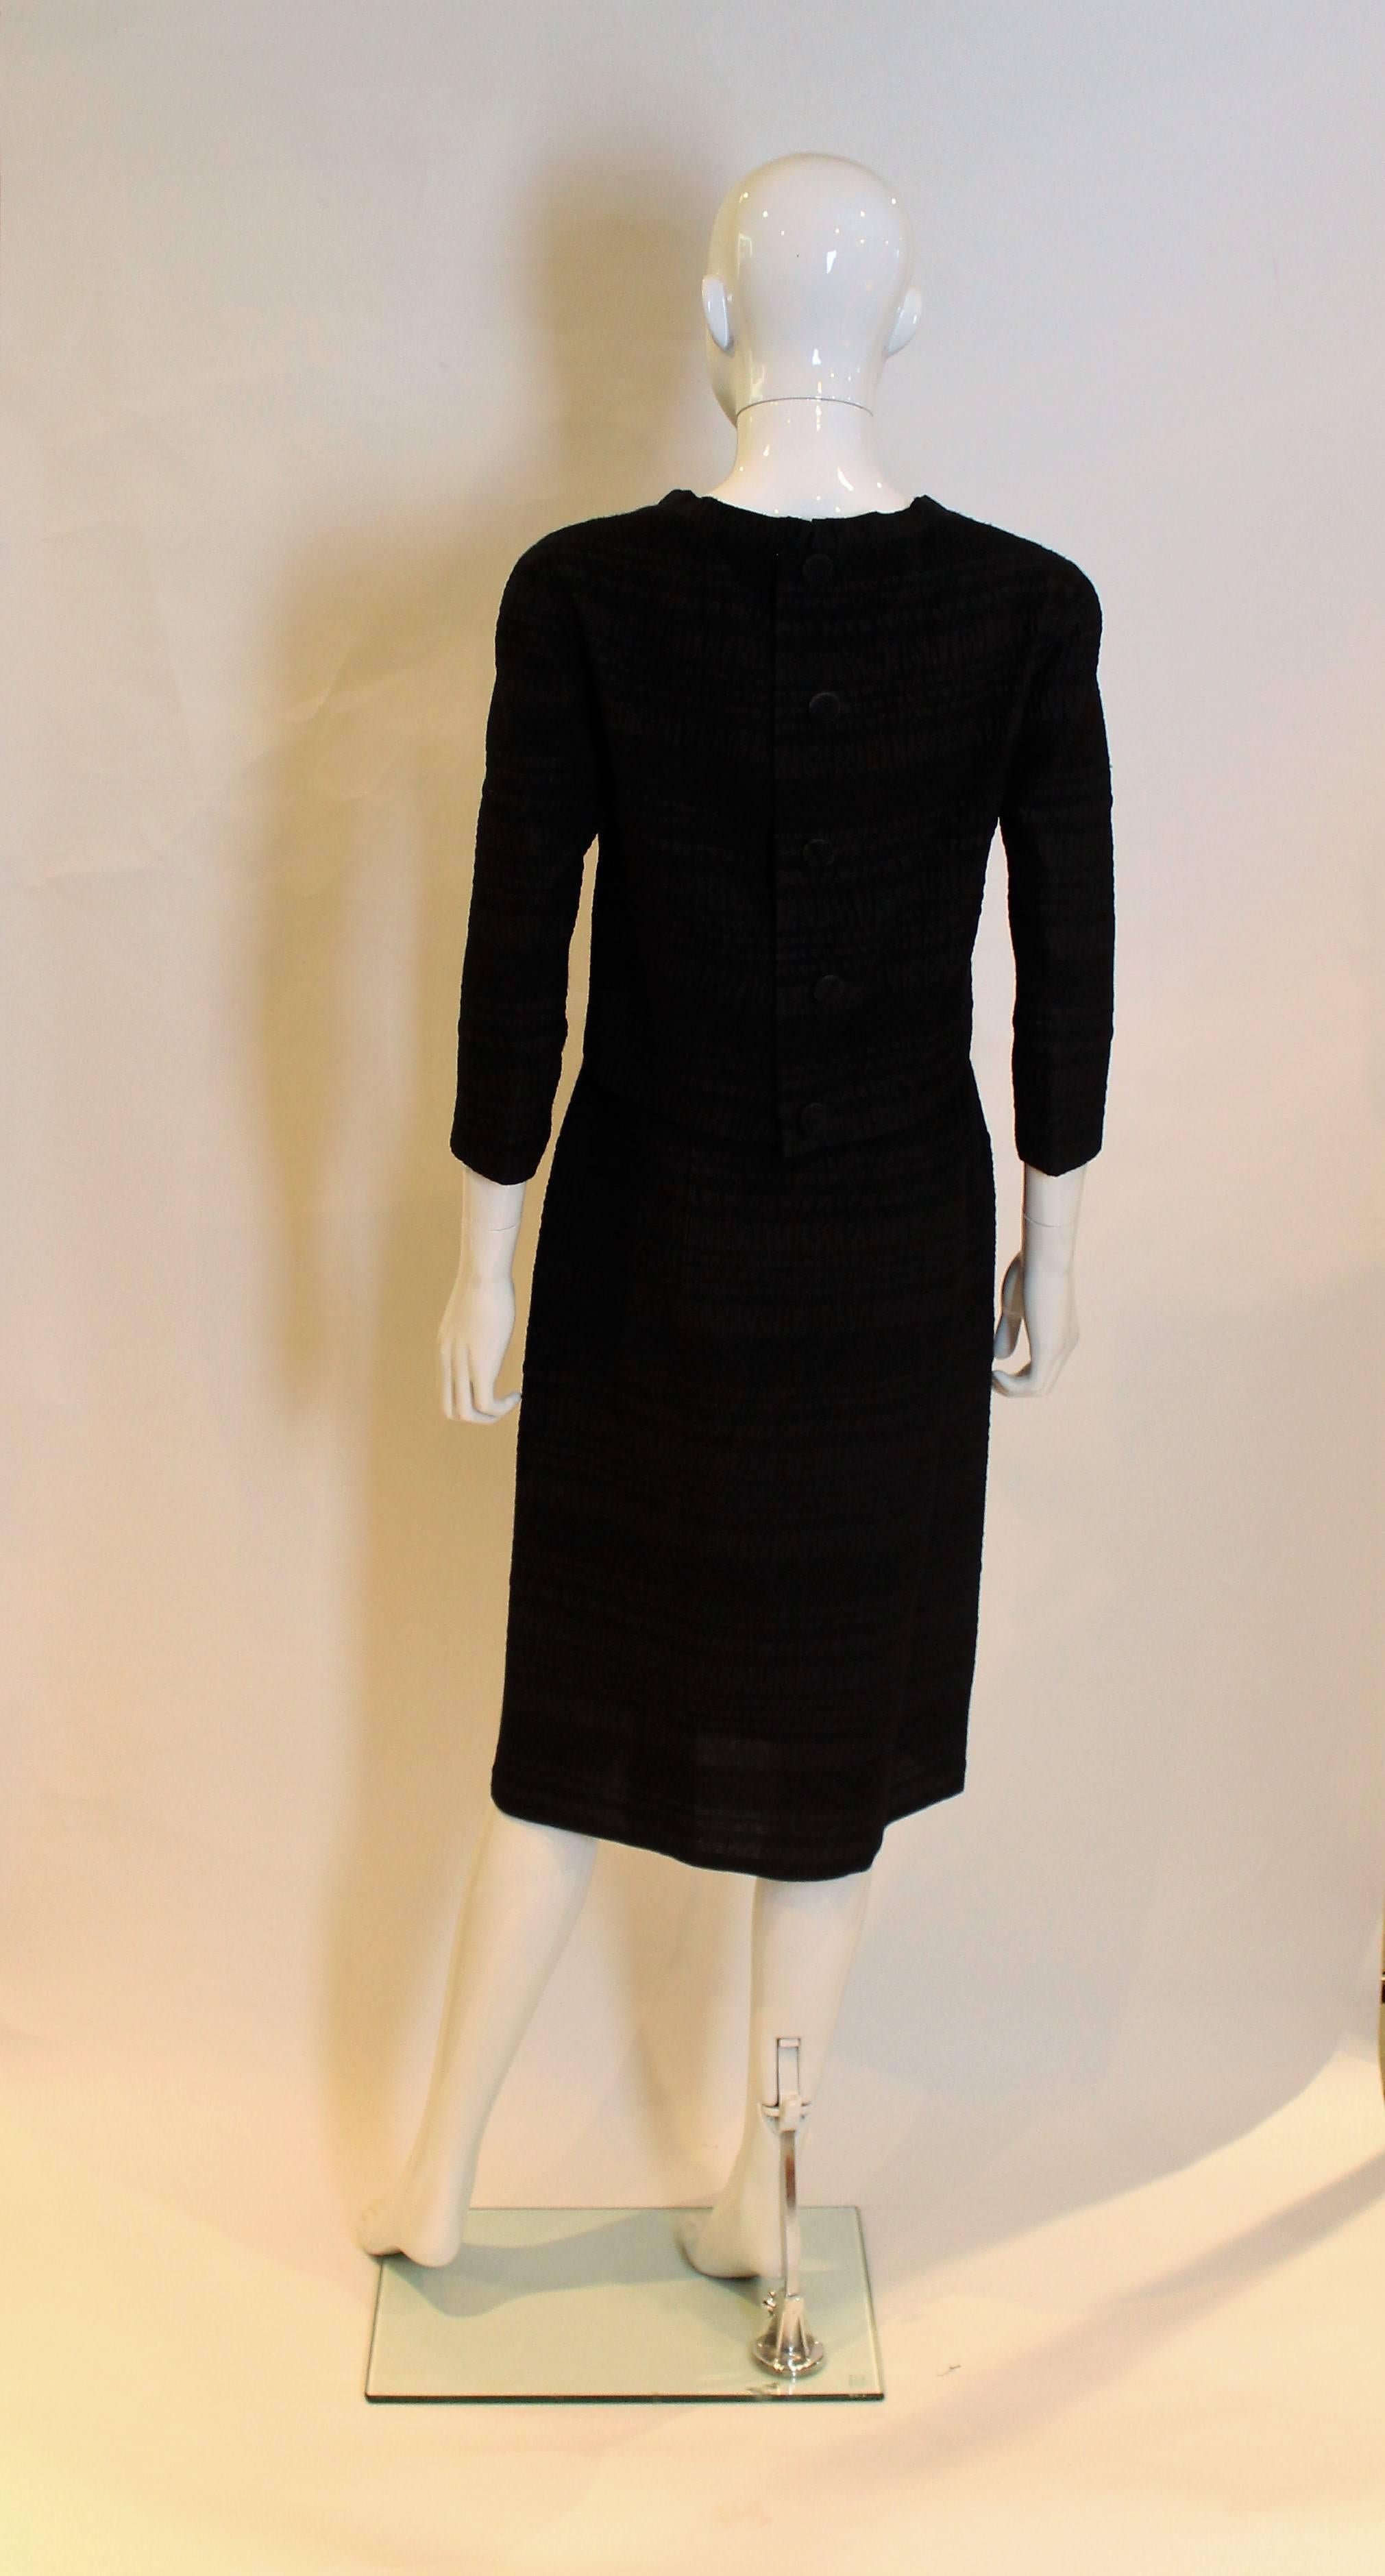  Vintage Pierrre Balmain  Black Dinner Dress In Excellent Condition For Sale In London, GB